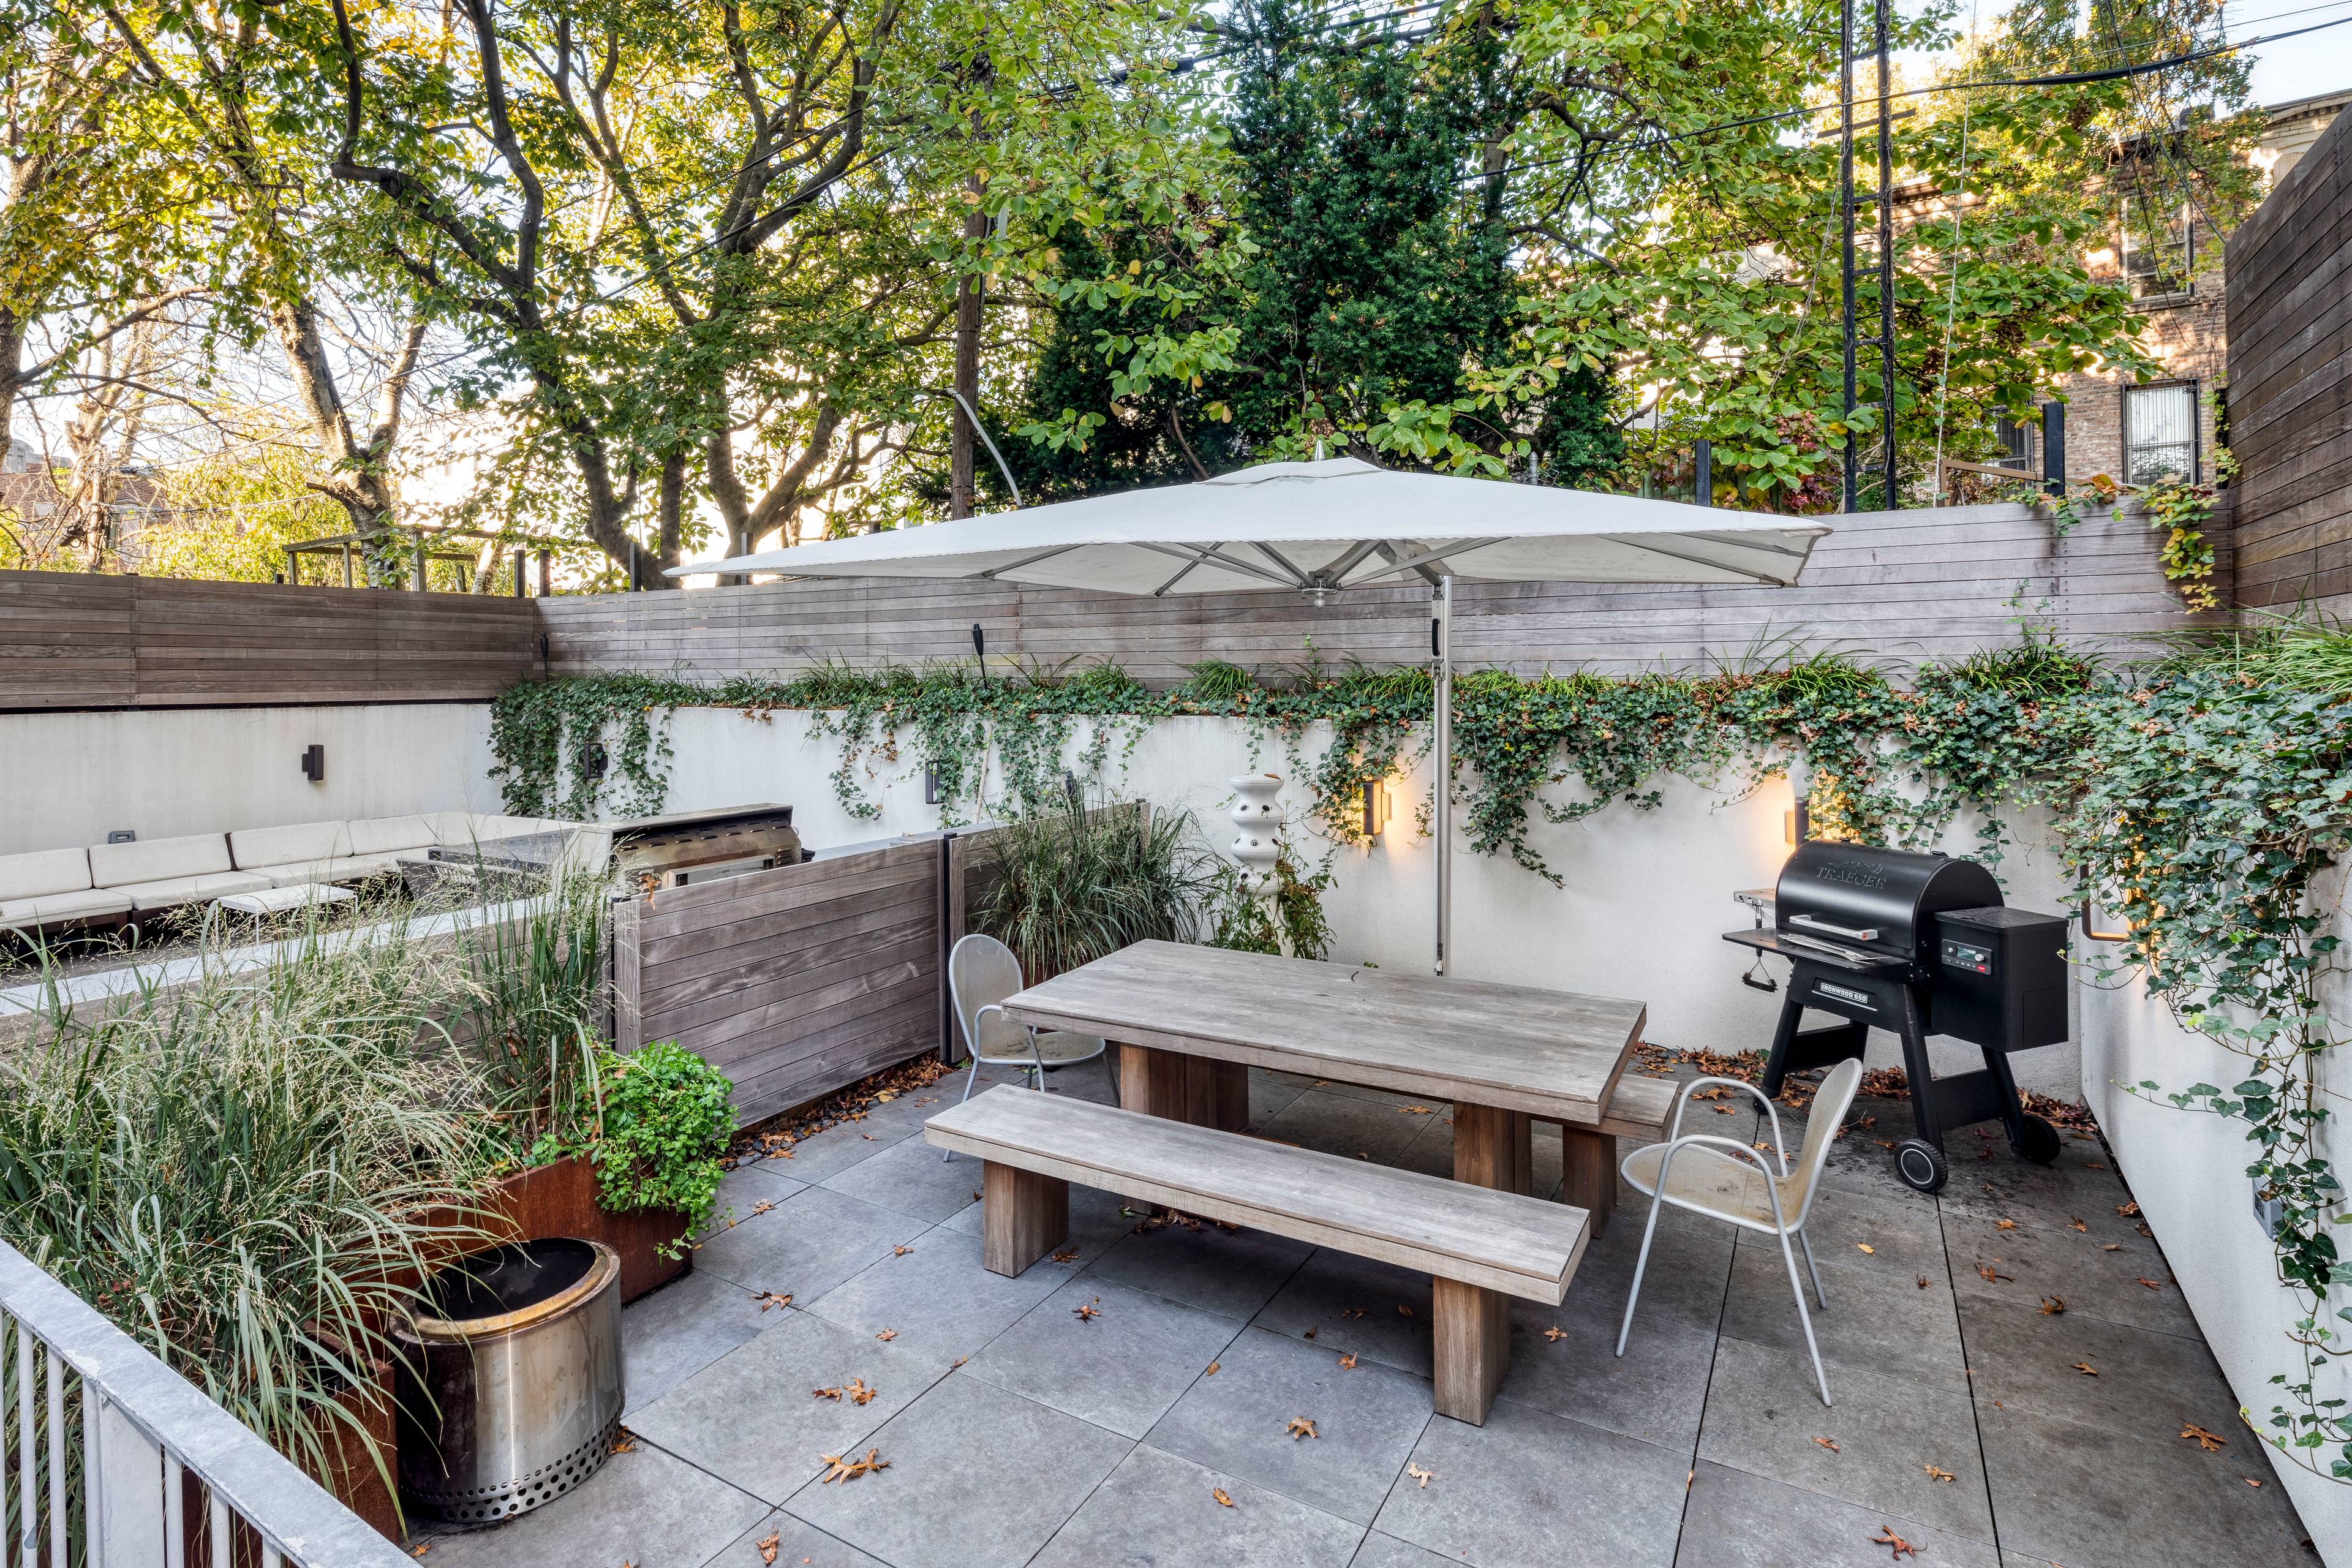 Extra wide Garden Duplex with Incredible Outdoor Spaces The first resale in one of the most luxurious boutique new developments in Park Slope !